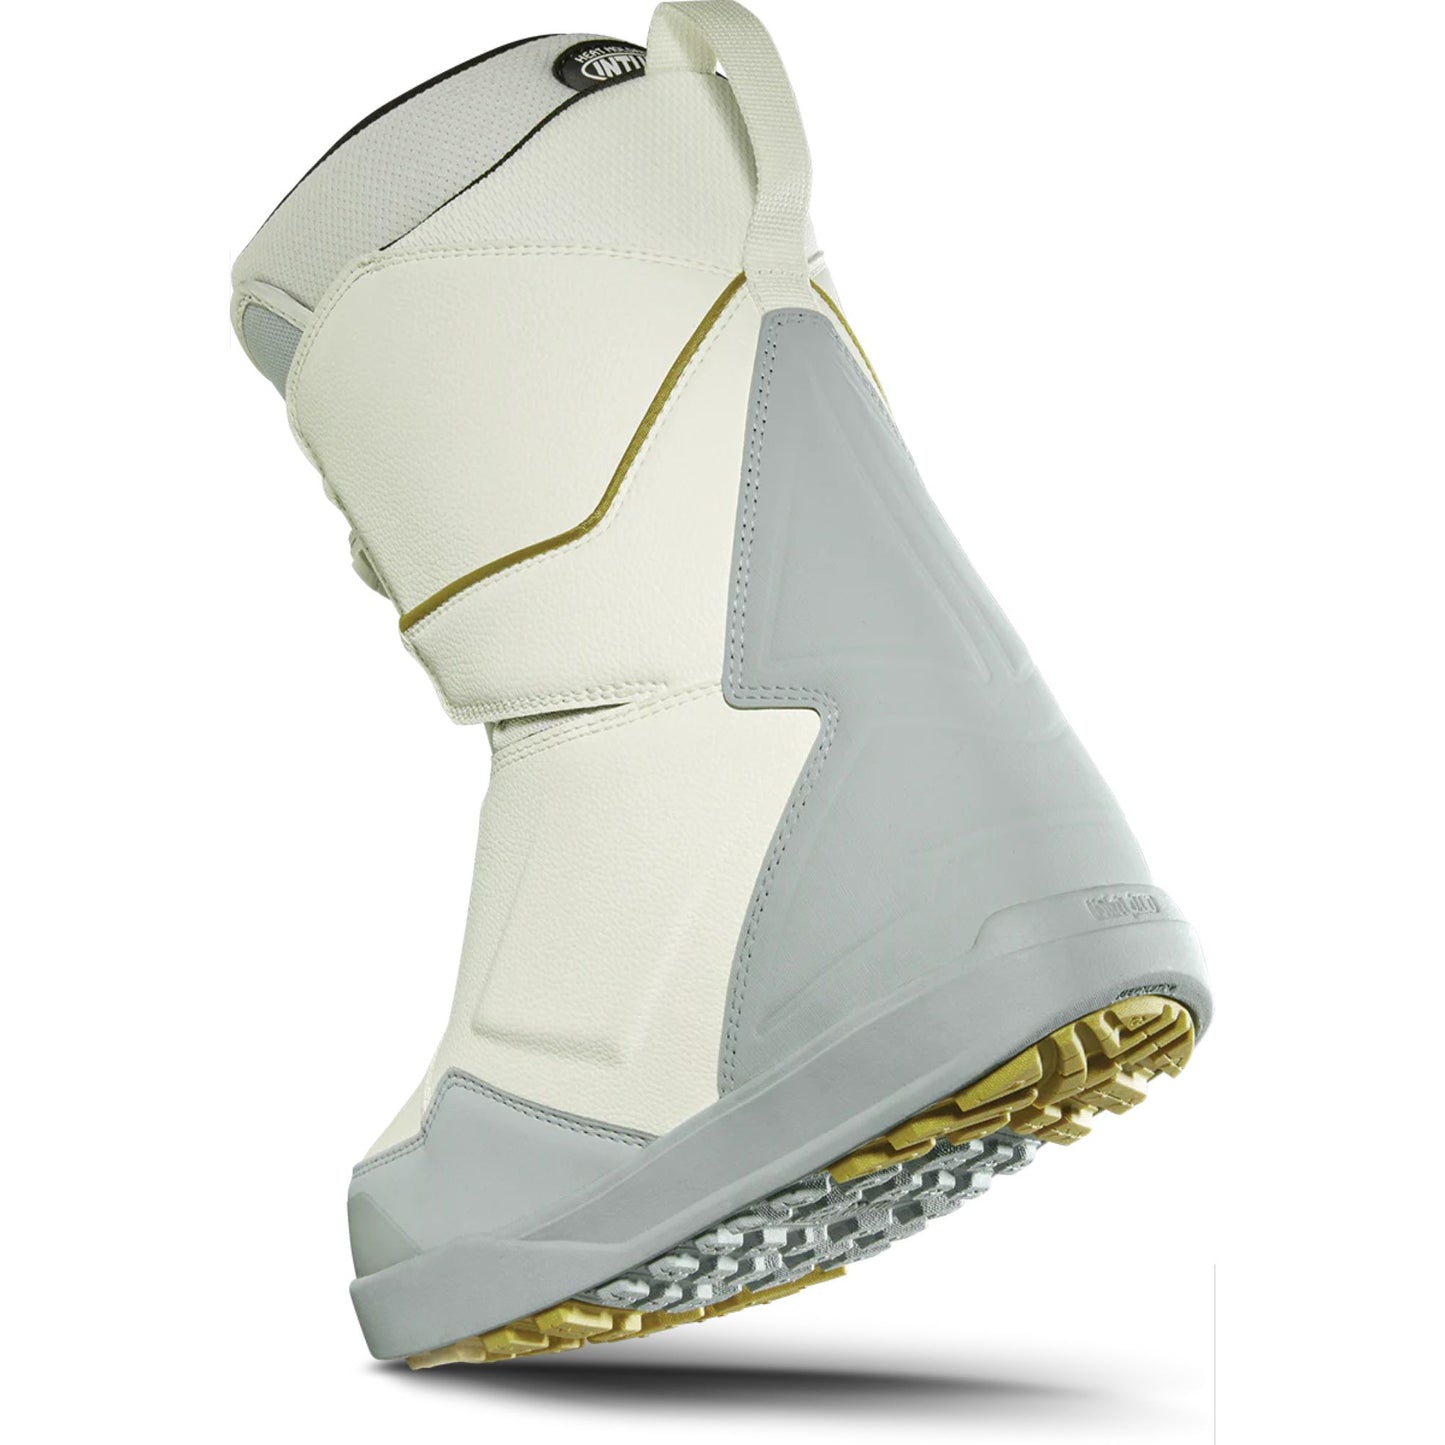 ThirtyTwo Women's Lashed Double BOA Snowboard Boots White/Grey Snowboard Boots